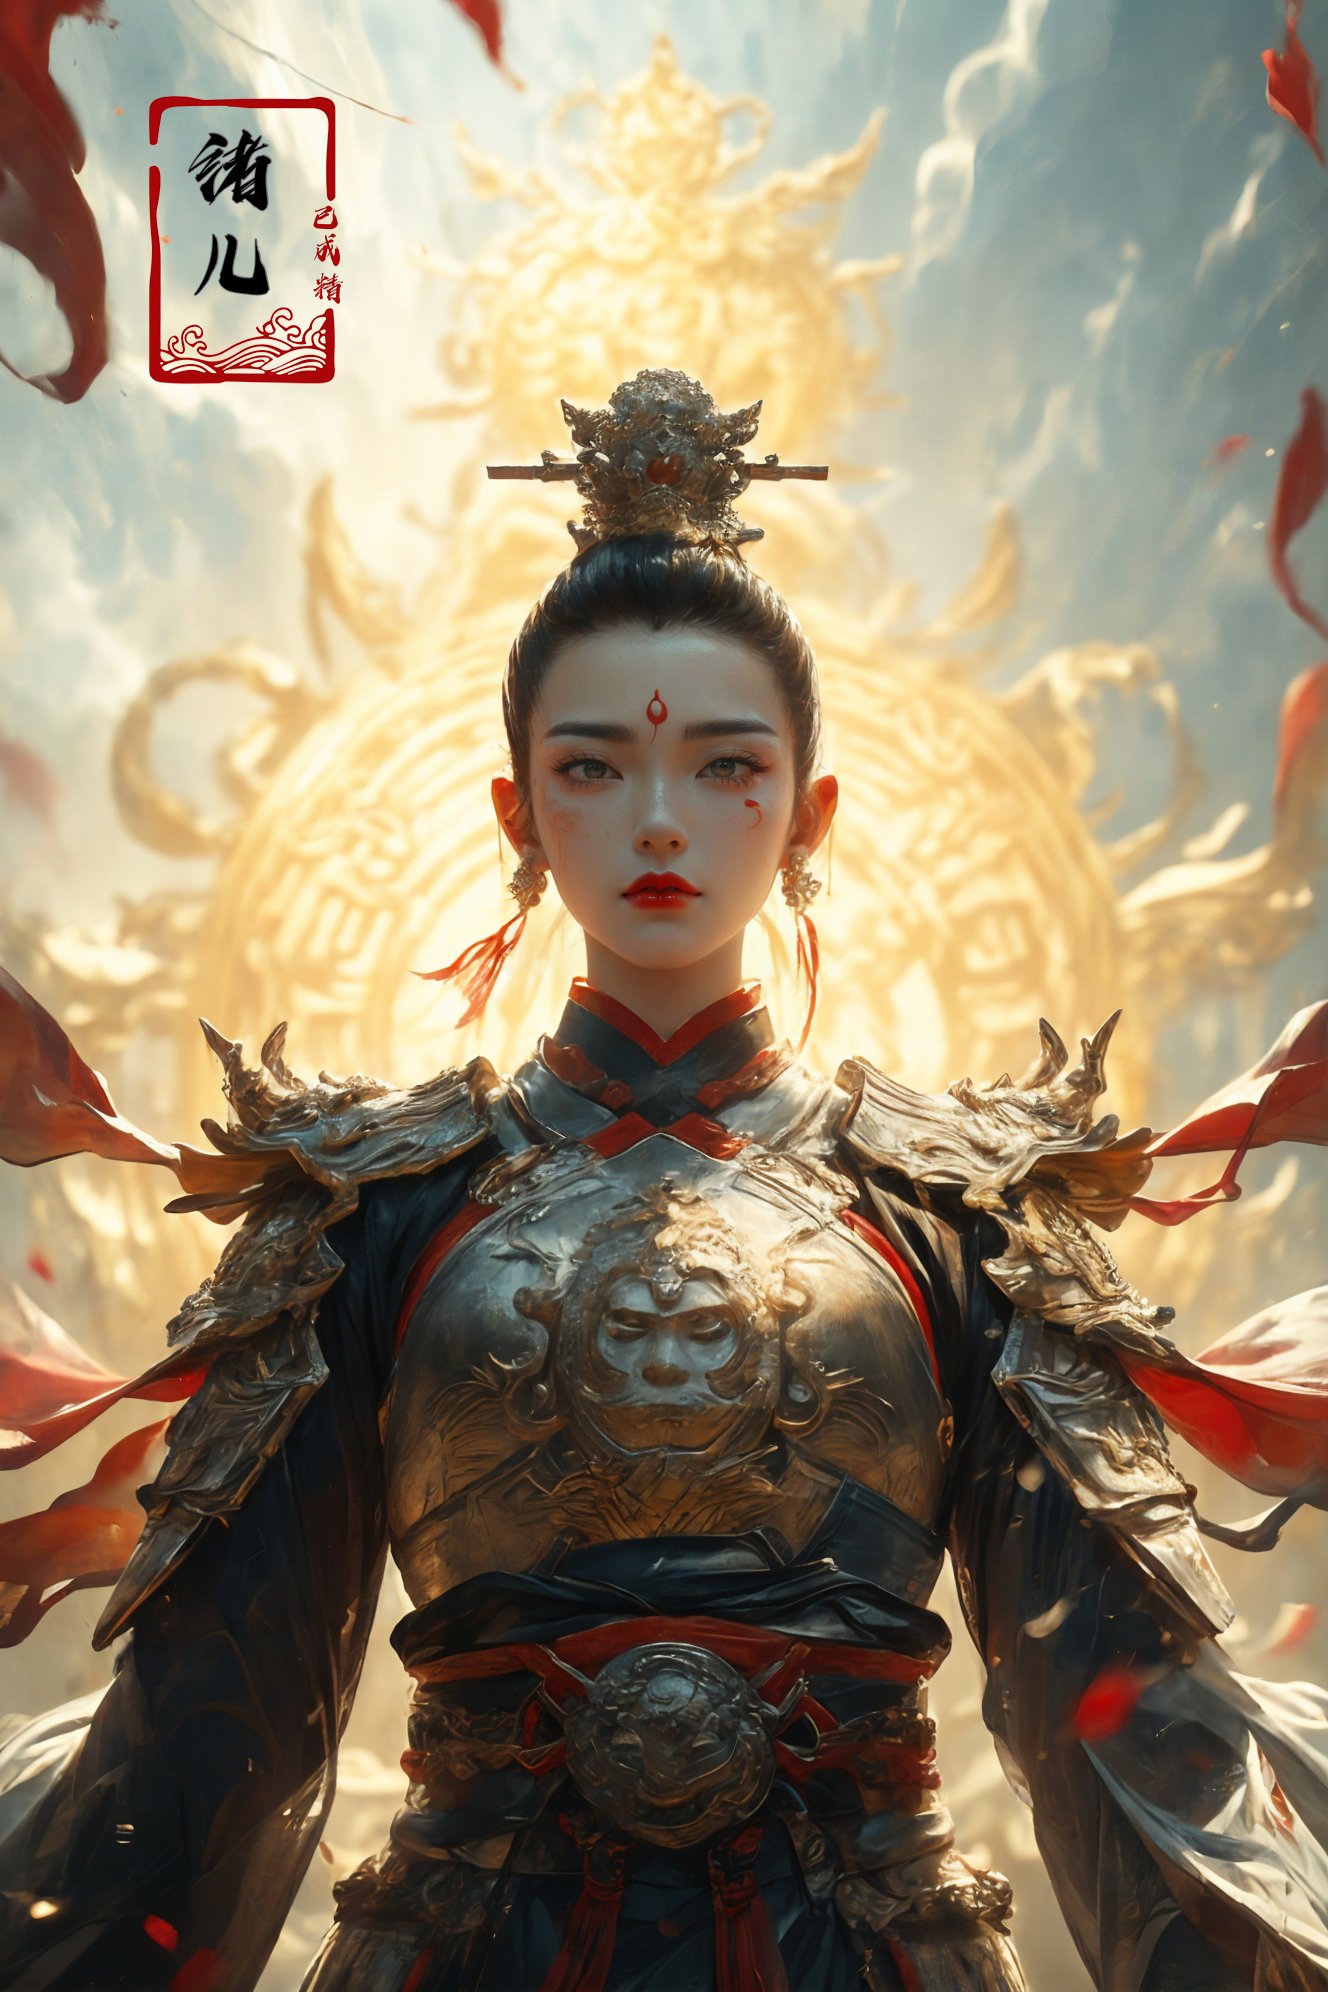 Dynamic Angle, Perspective, High Point,pov，1woman, xuer Ancient Chinese armor,  shoulder armor，holding weapon, Chinese sword，(full body:1.1), A mature face，sideways glance, (cold attitude,eyeshadow,eyeliner:1.1),(red lips:1.3),watery eyes,   (Milky skin:1.2), (shiny skin:1.4)，(long legs:1.3),  (upper body:1.5)，A shot with tension，(sky glows red,Visual impact,giving the poster a dynamic and visually striking appearance:1.2),Chinese Zen style,impactful picture,<lora:绪儿-中国铠甲 xuer Ancient Chinese armor:0.8>